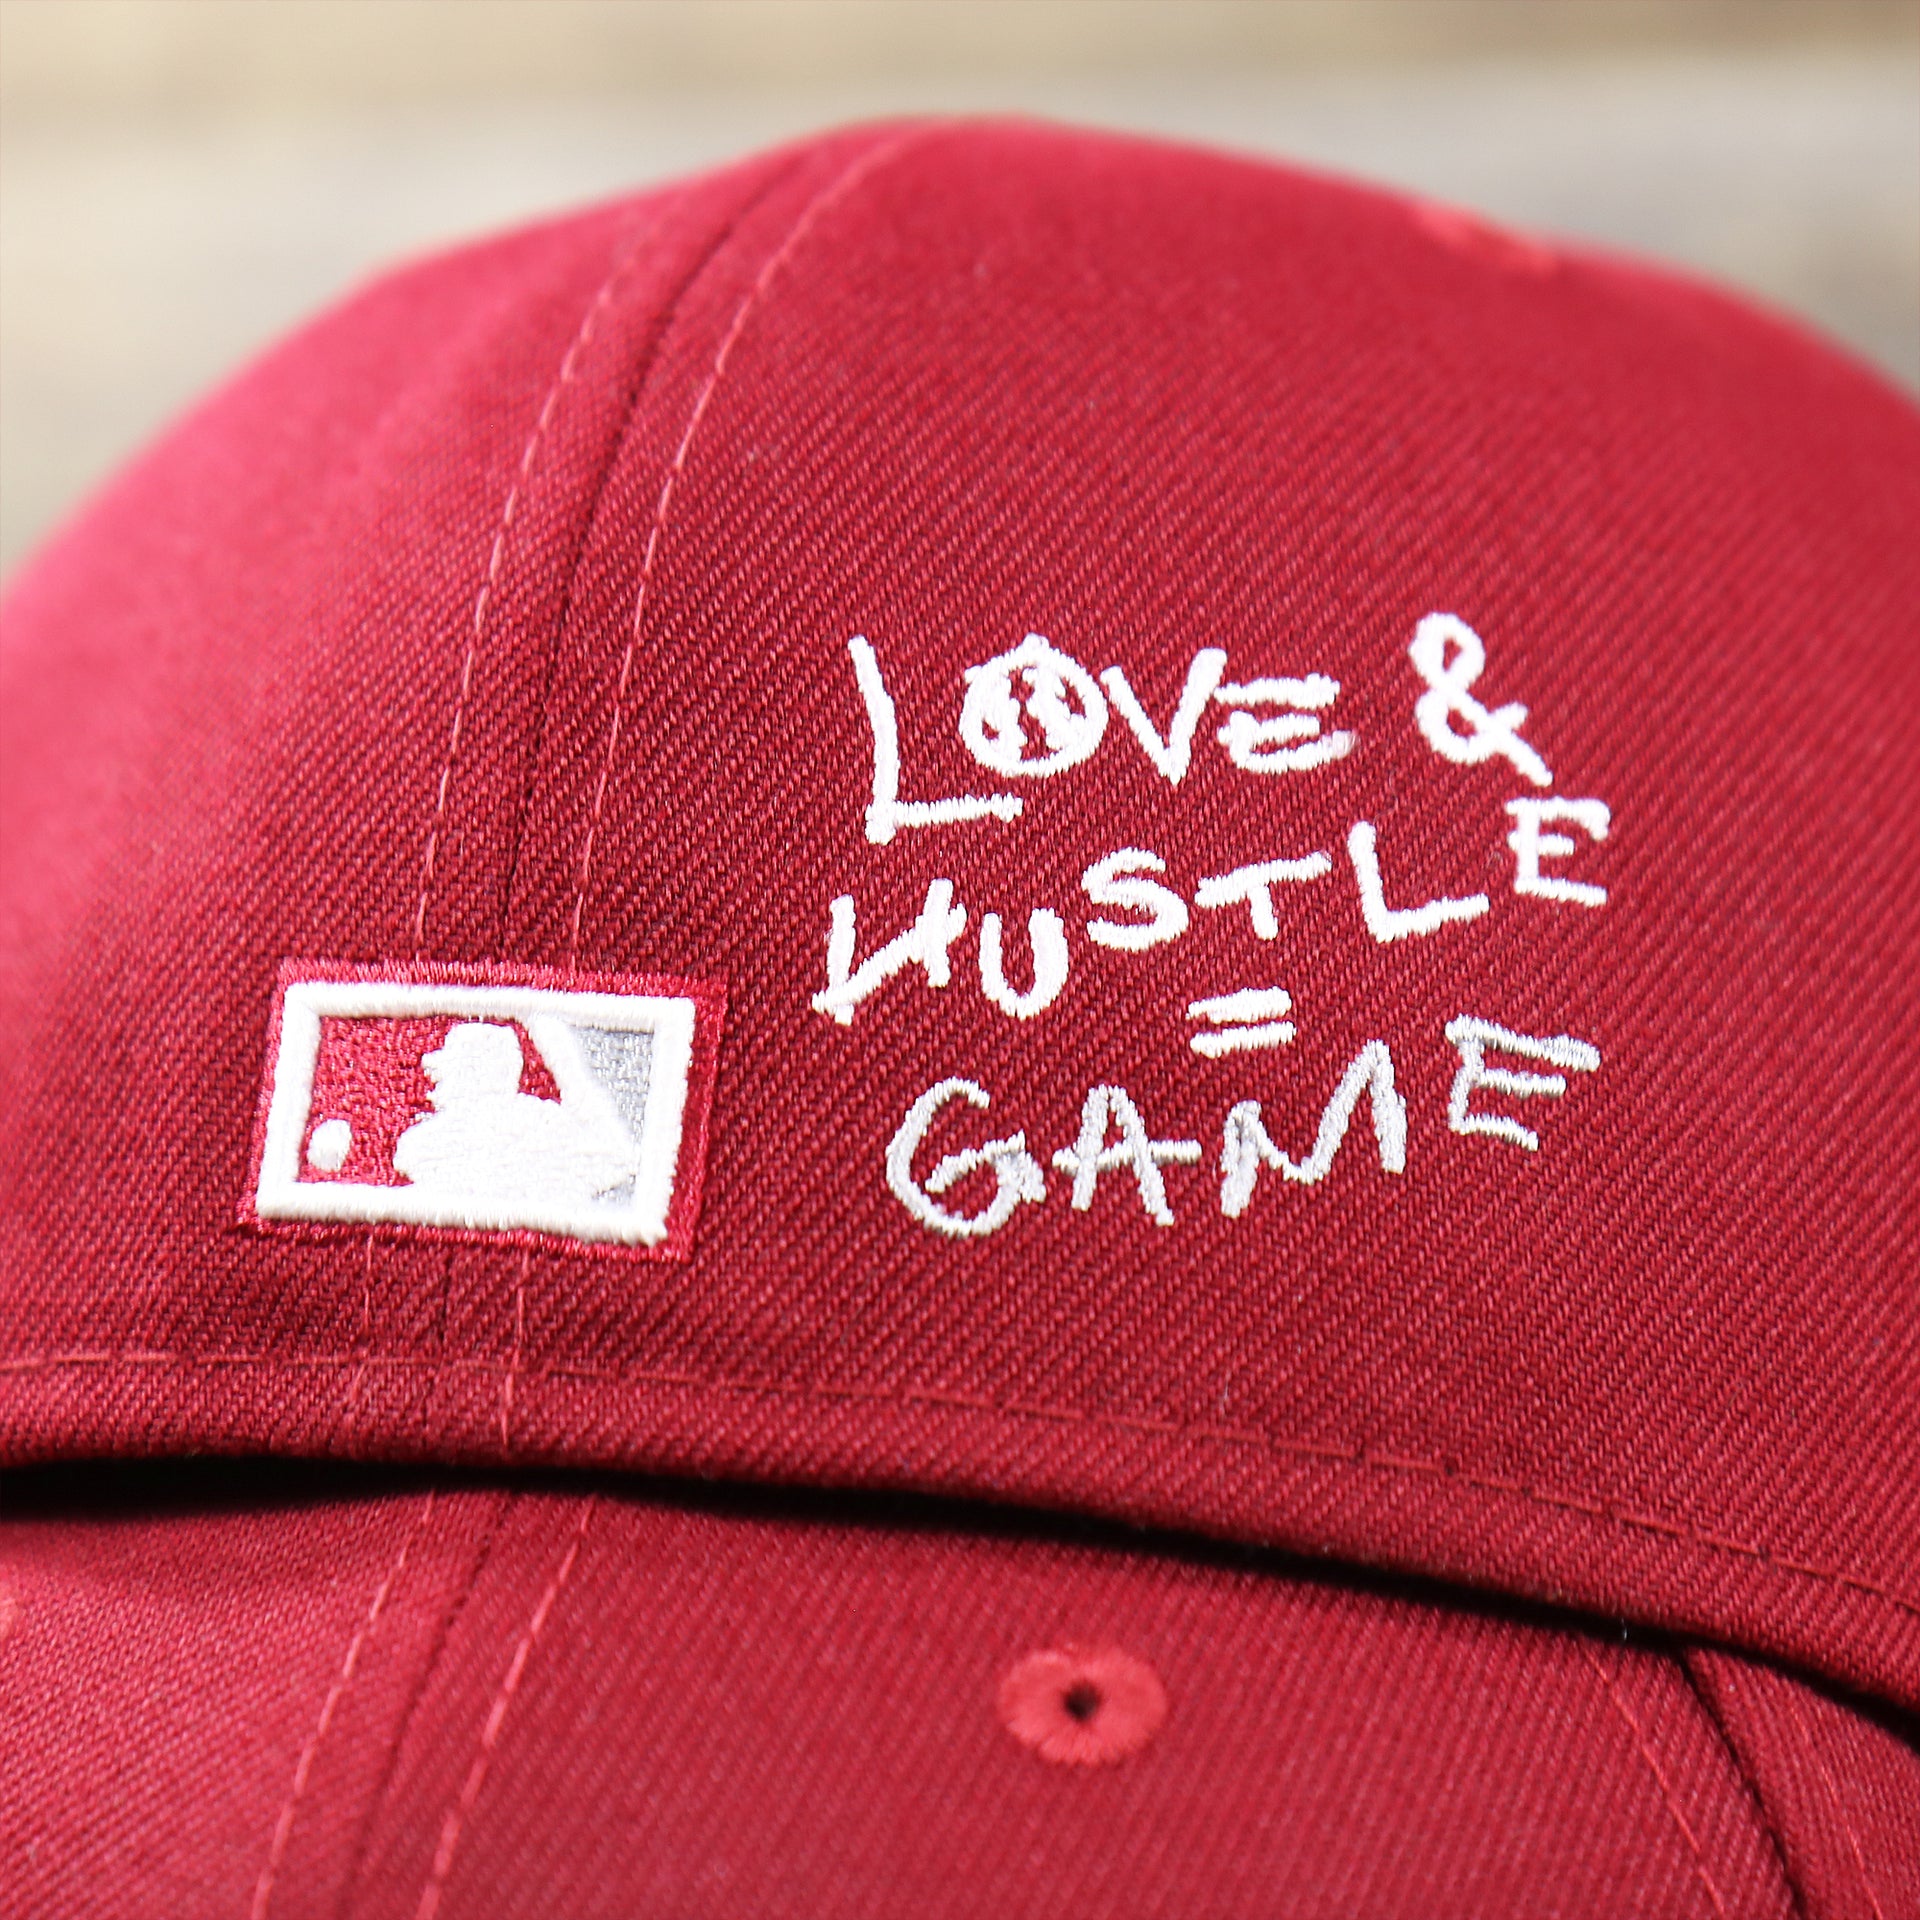 The MLB Batterman Logo with the Love & Hustle = Game text on the Cooperstown Philadelphia Phillies Baseball Heart Gray Bottom World Series 59Fifty Fitted Cap | Maroon 59Fifty Cap